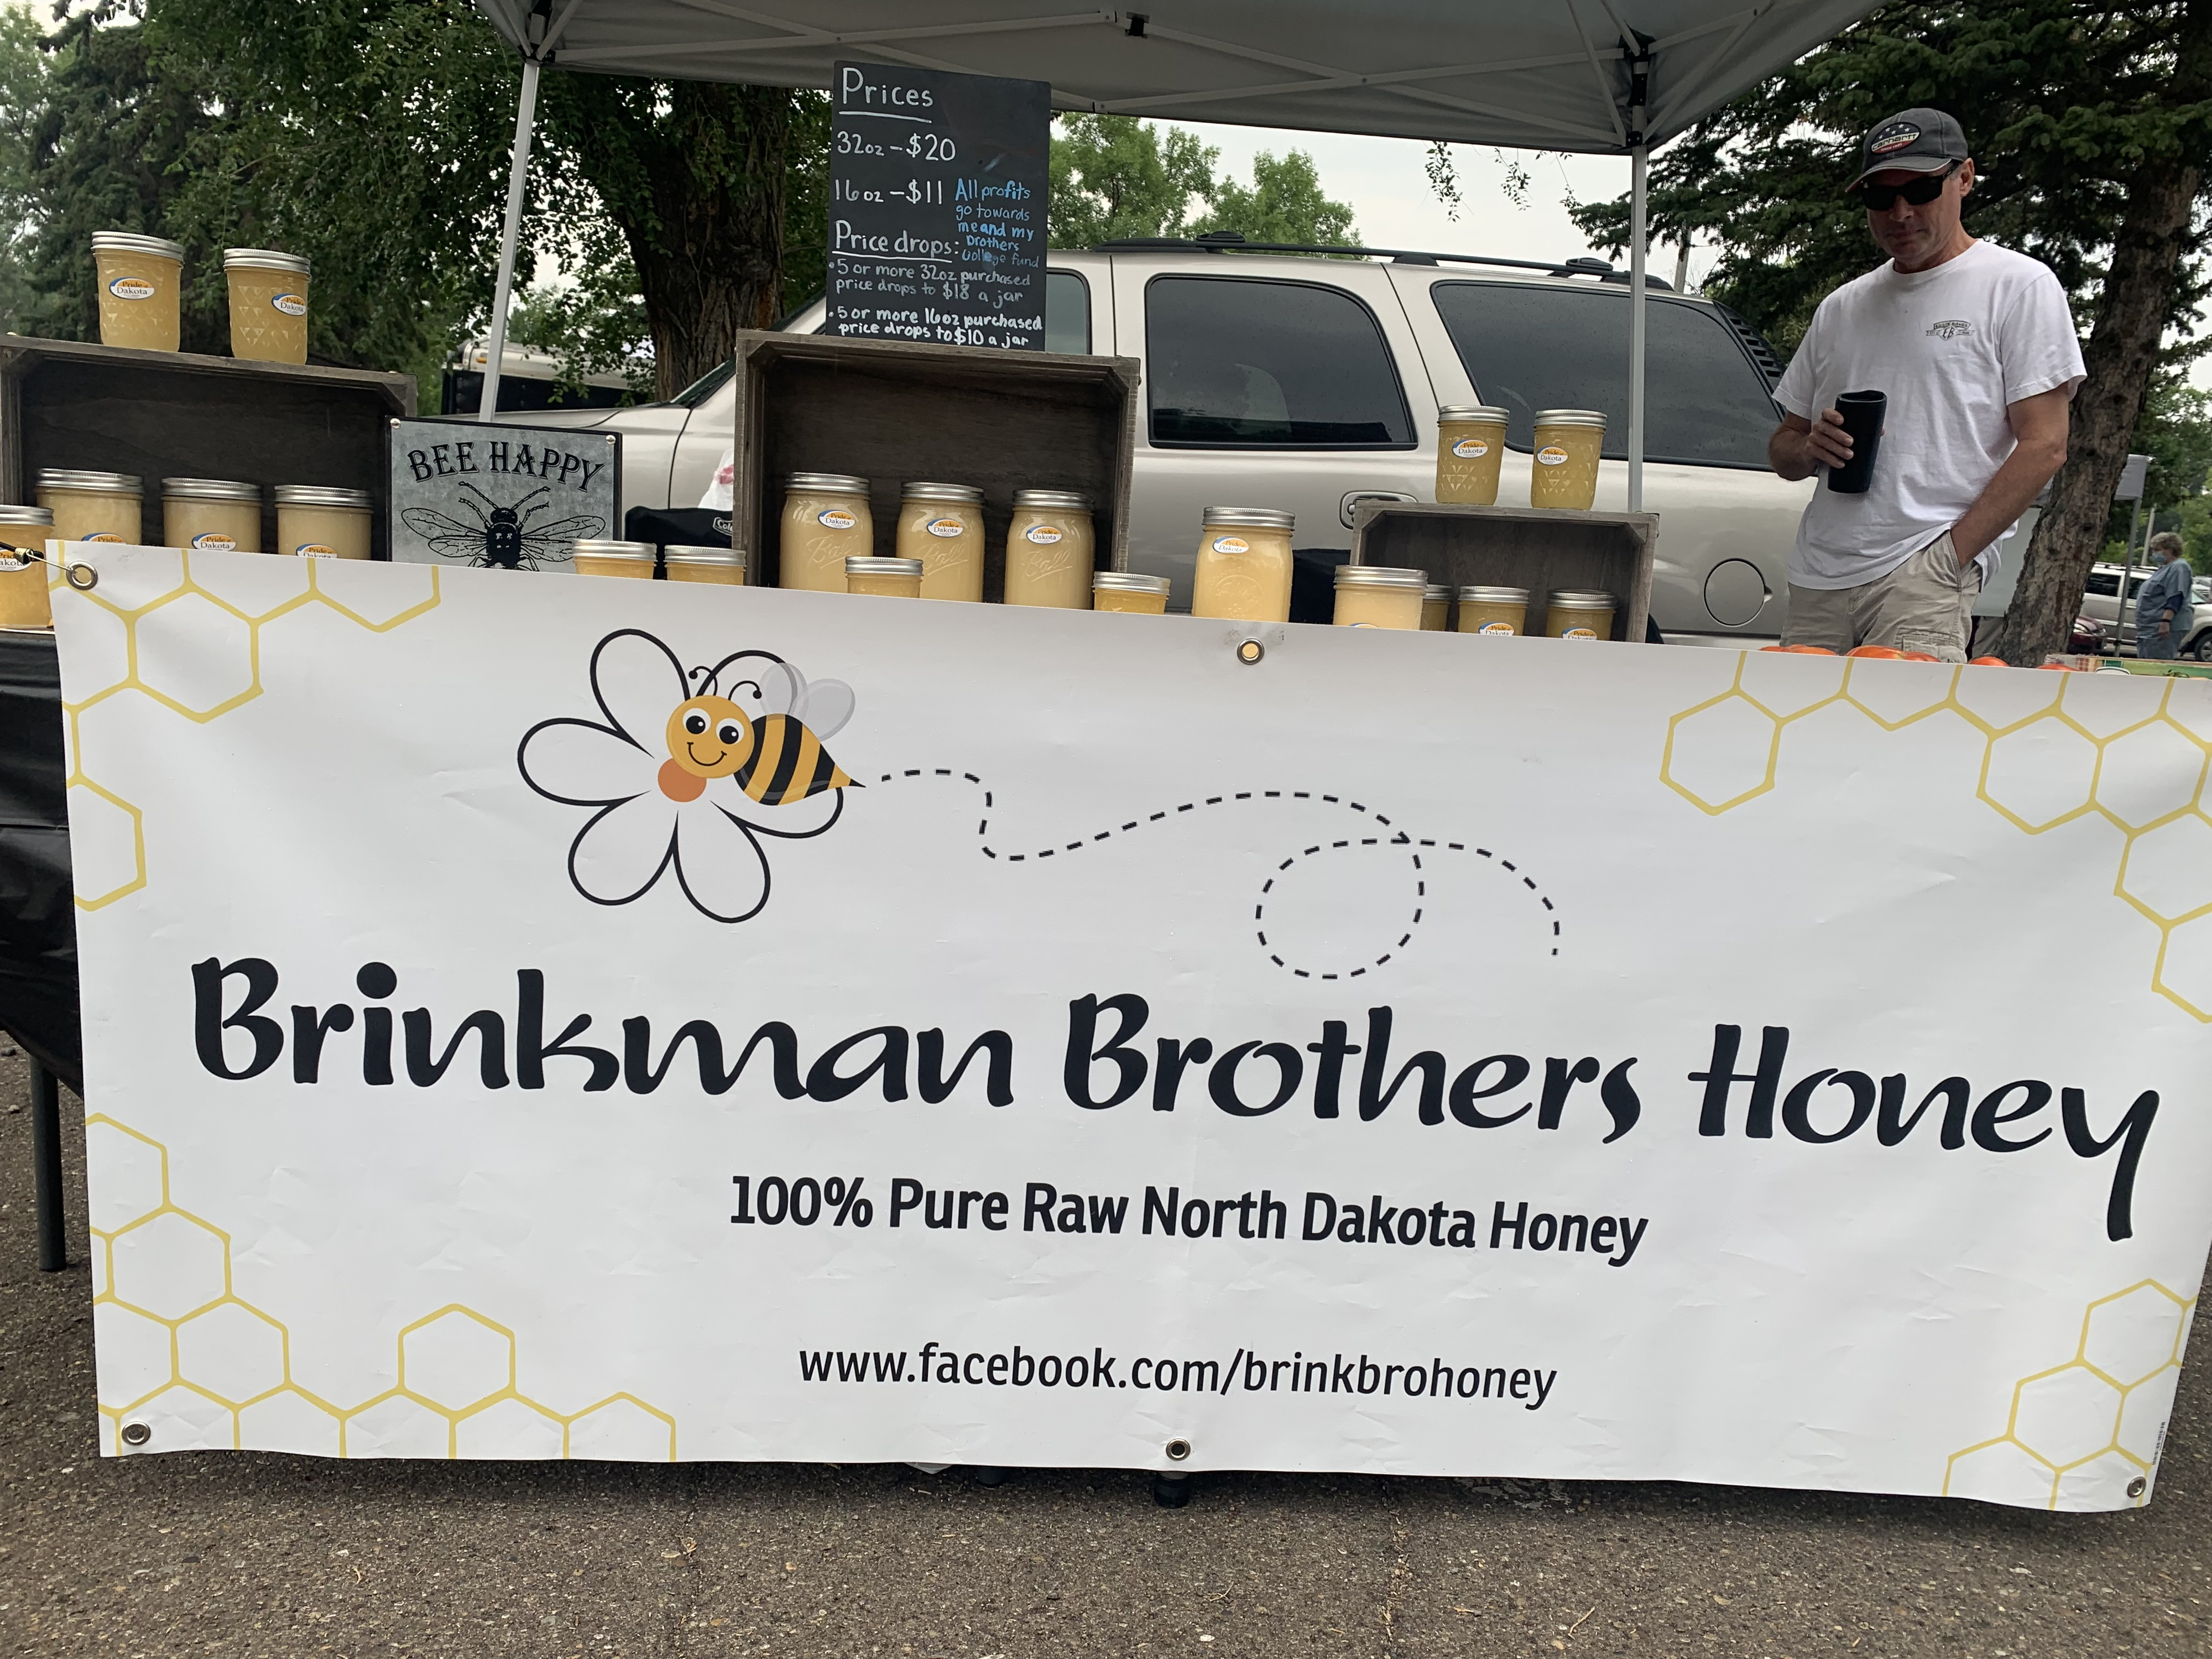 Two brothers build a bee business